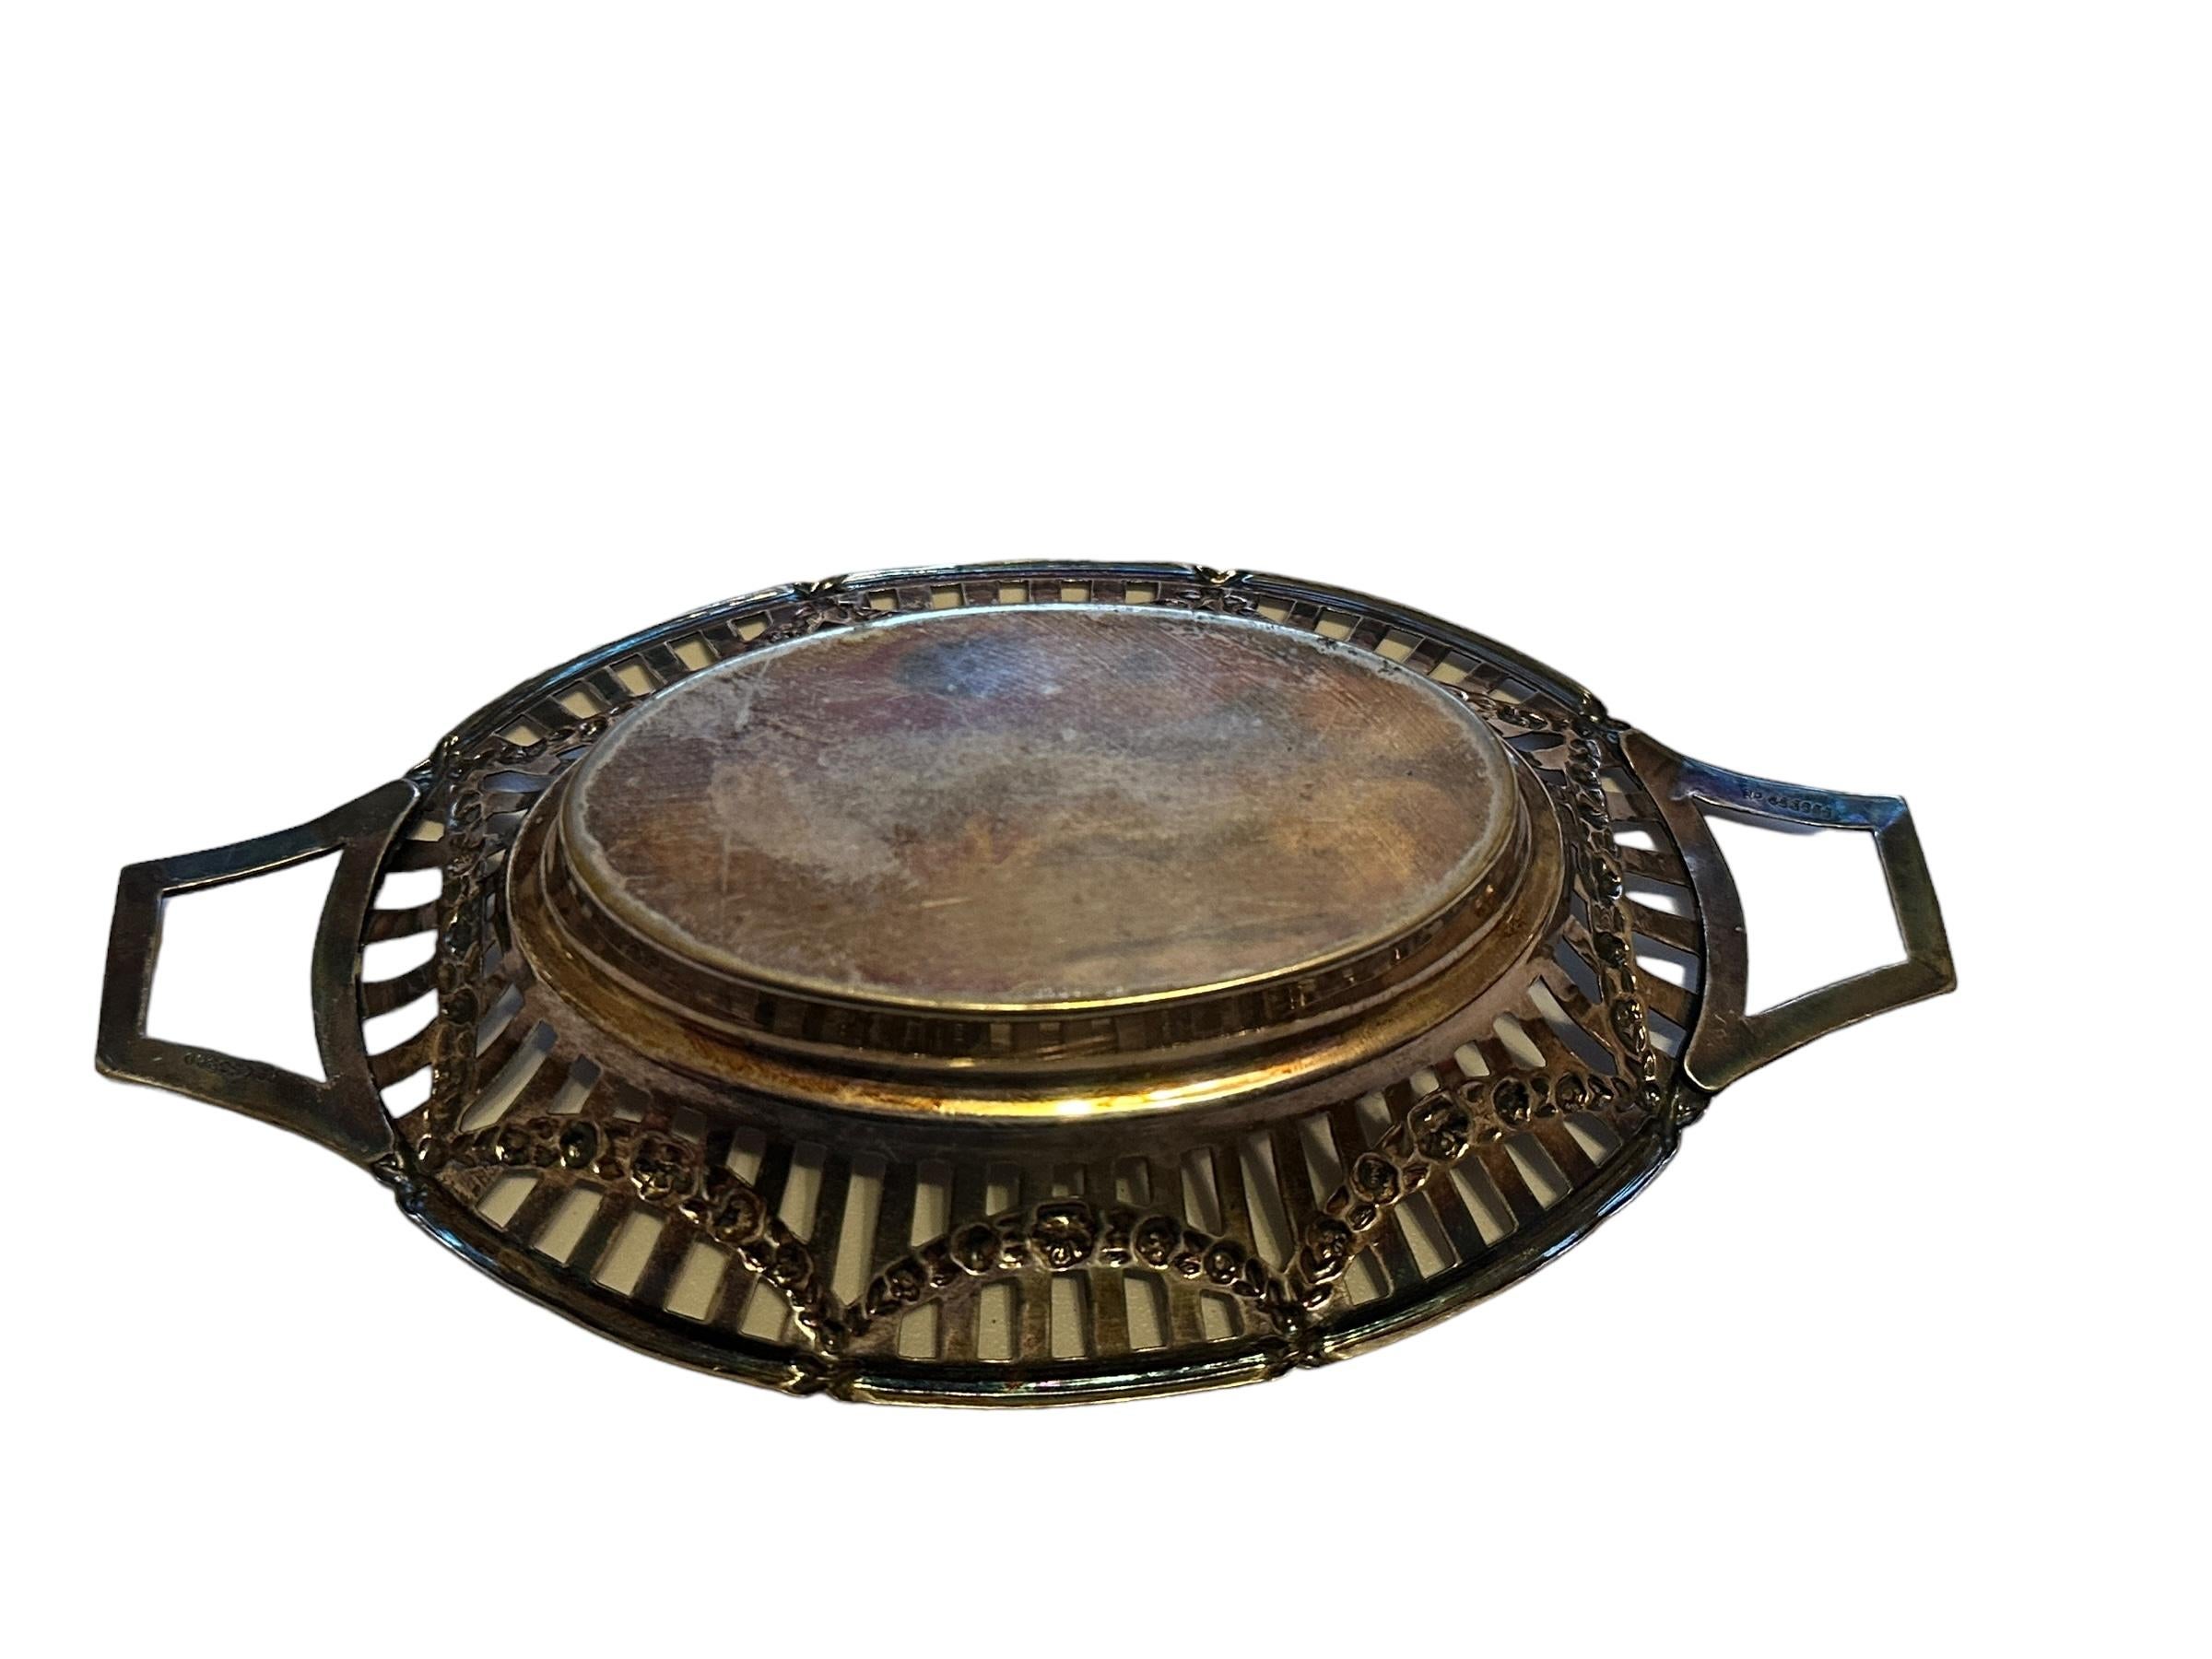 Early 20th Century Vintage Silver Plate Candy Dish Basket Tray, 1910s, Germany or Austria For Sale